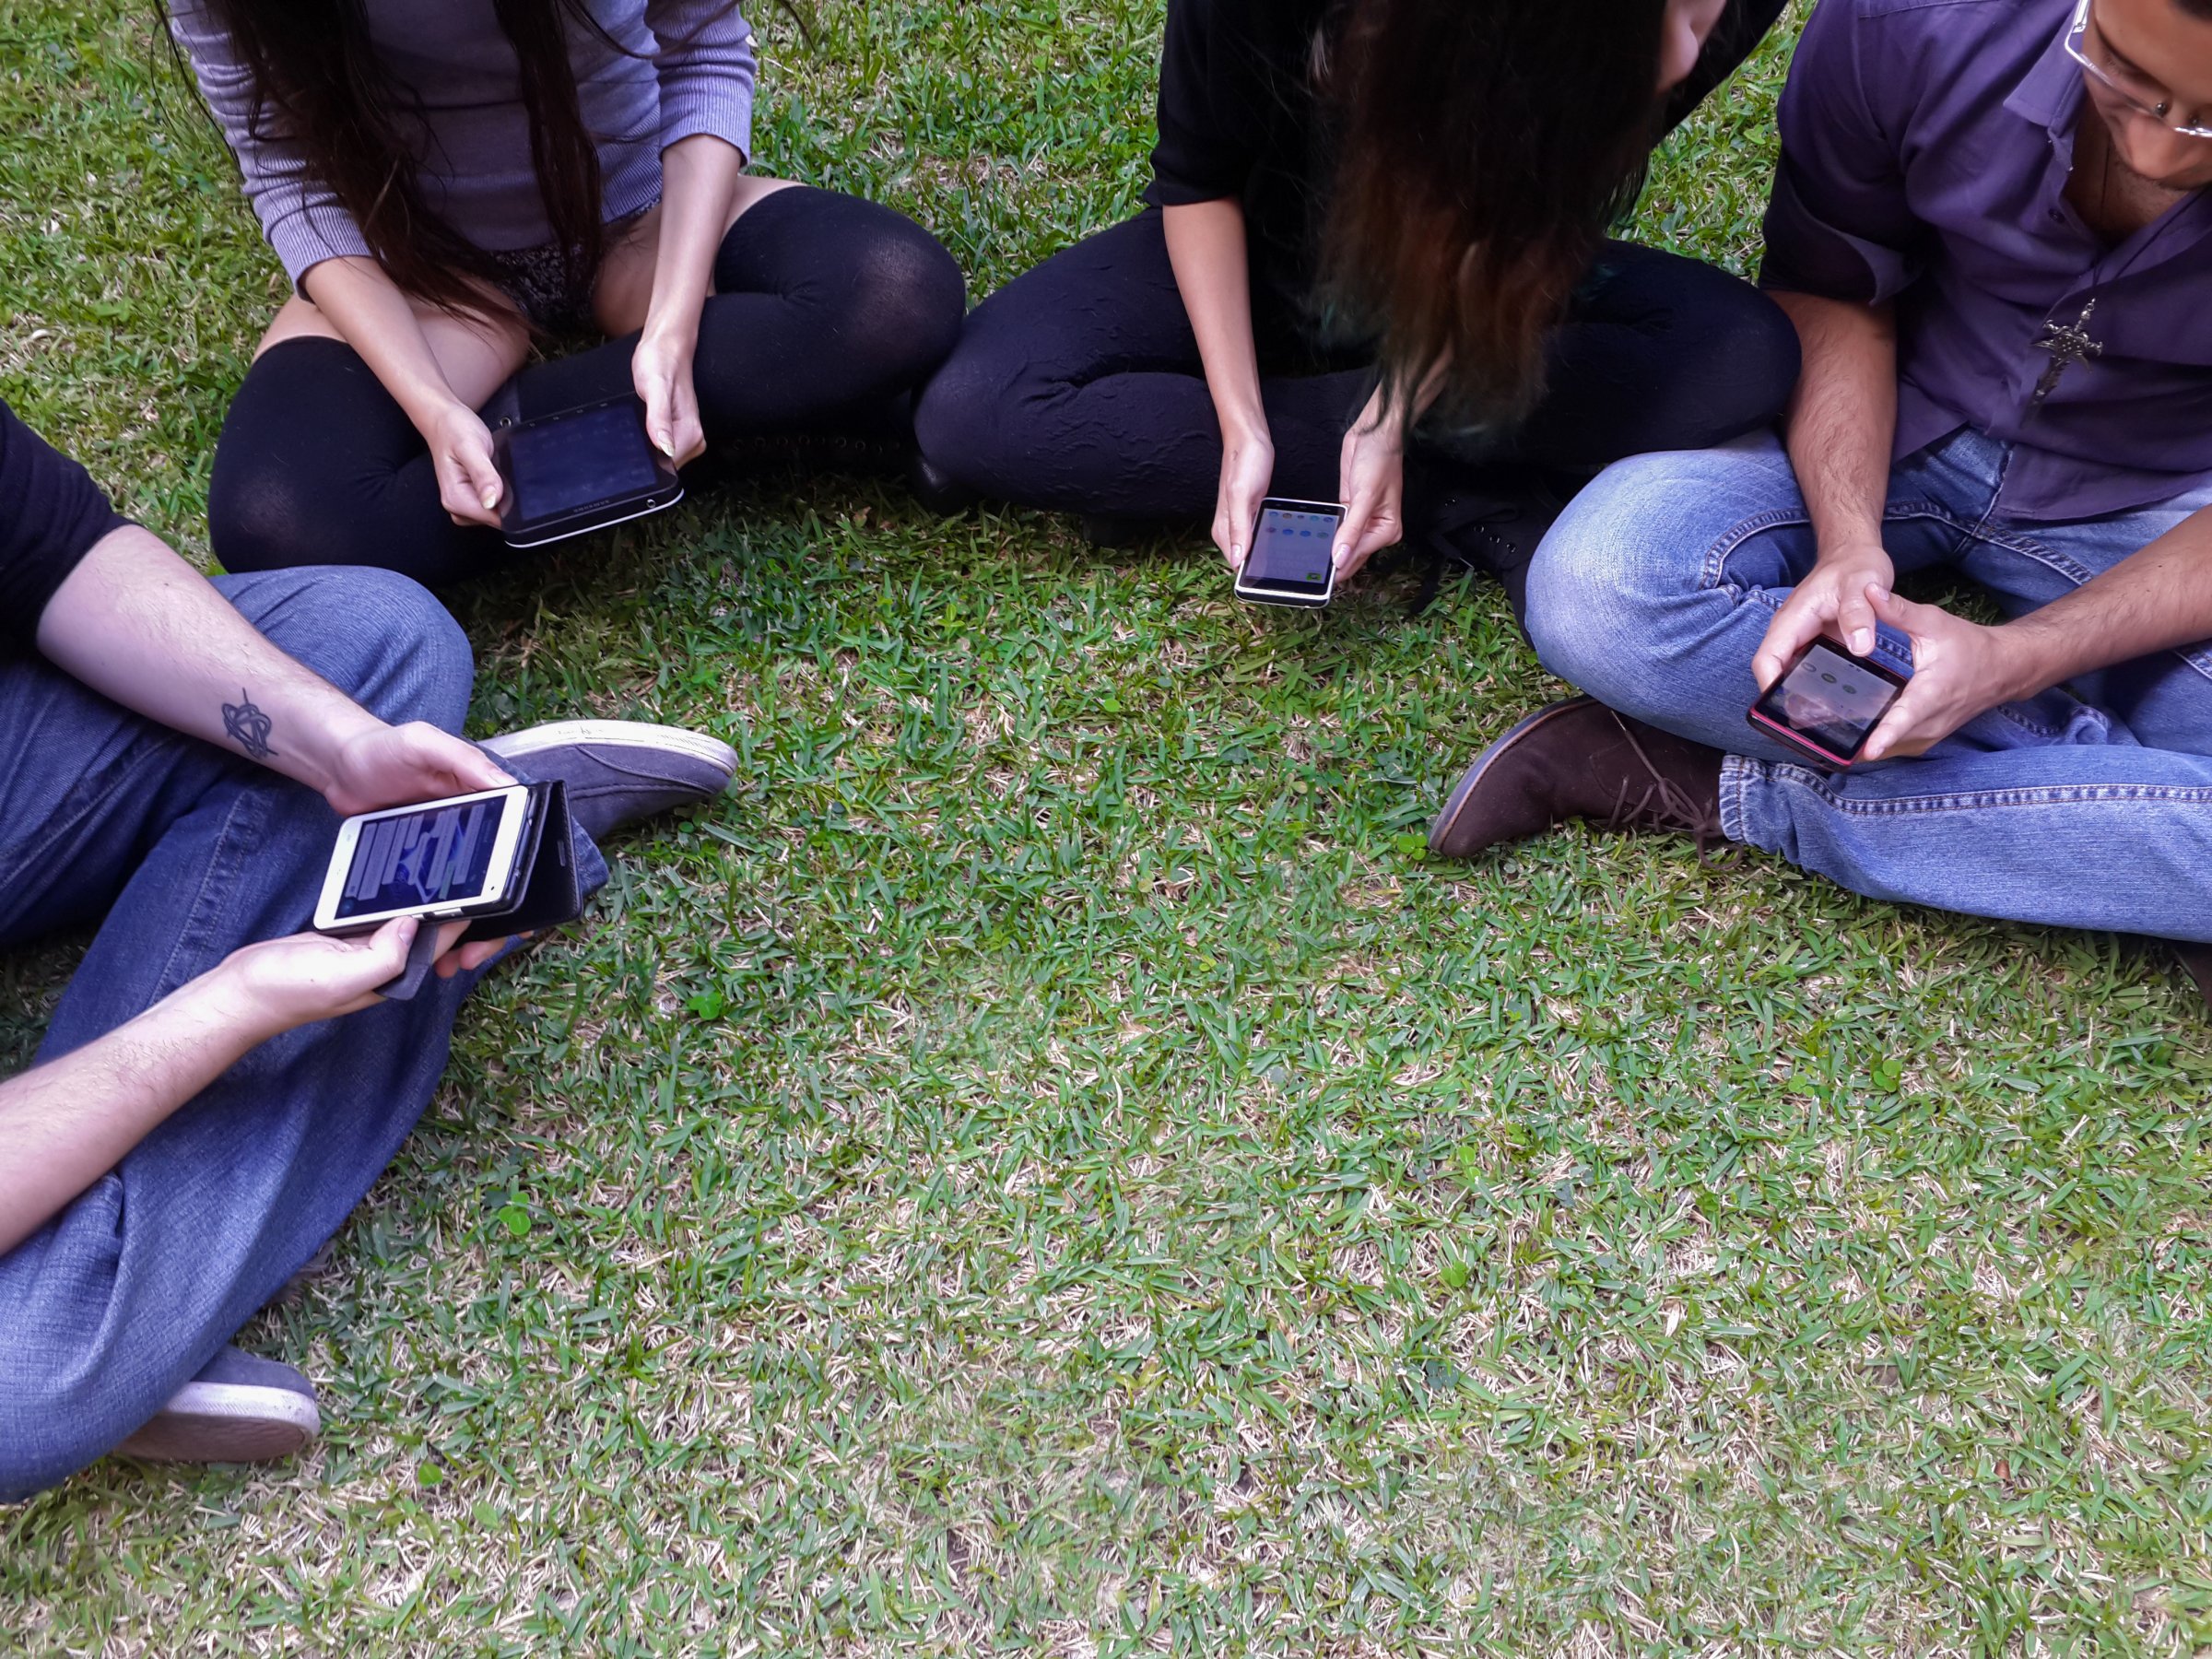 Millennials sit in a circle on grass looking at their phones.